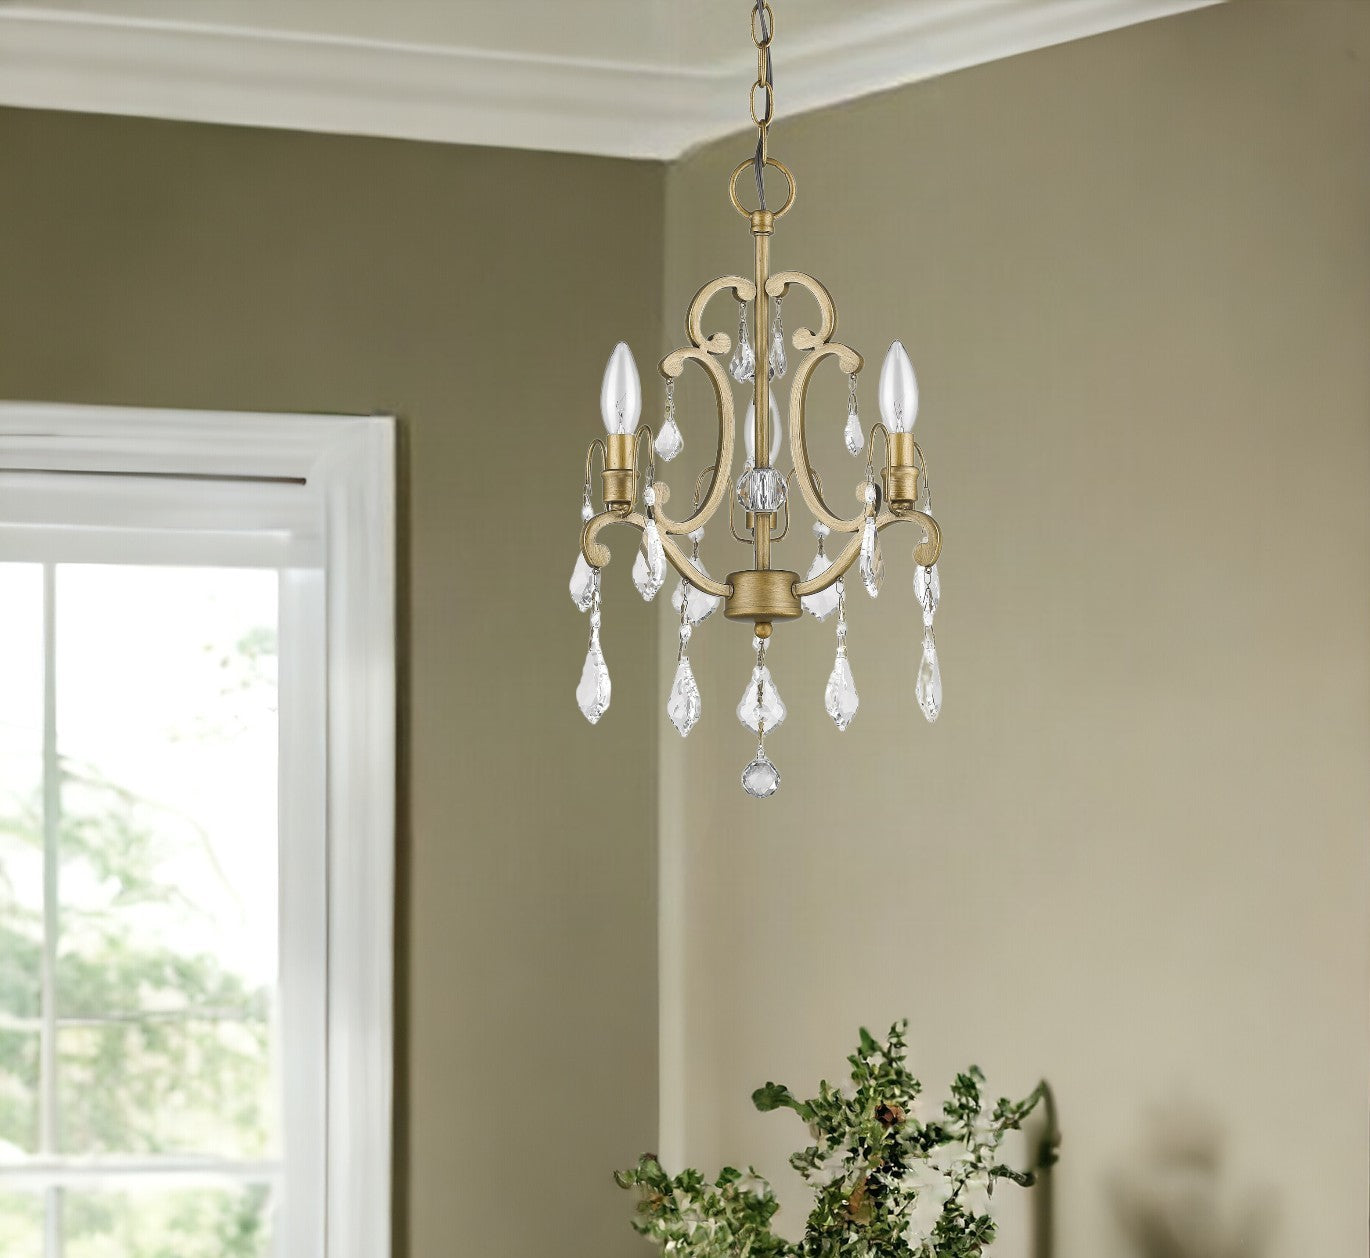 Claire 3-Light Antique Gold Convertible Mini Chandelierto Semi-Flush Mount With Crystal Accents